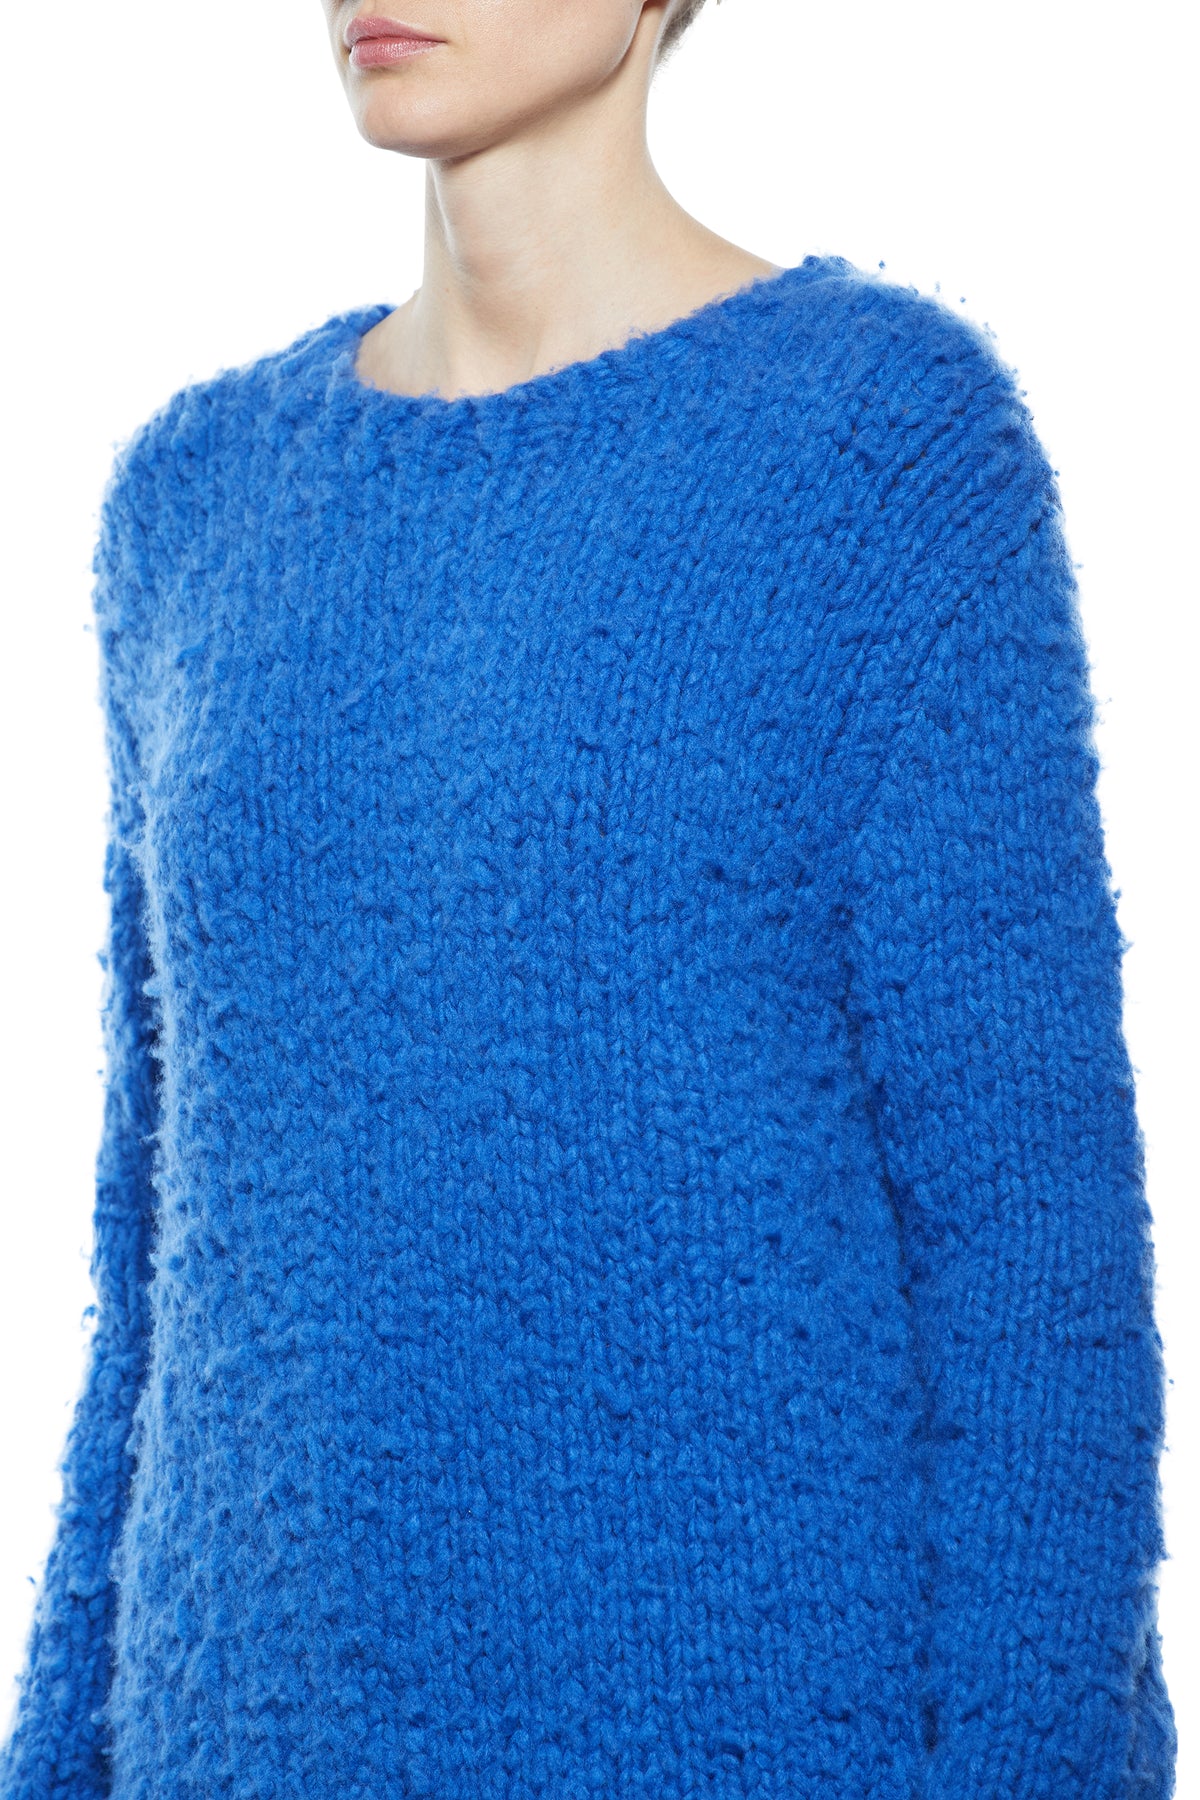 Lawrence Sweater in Welfat Cashmere